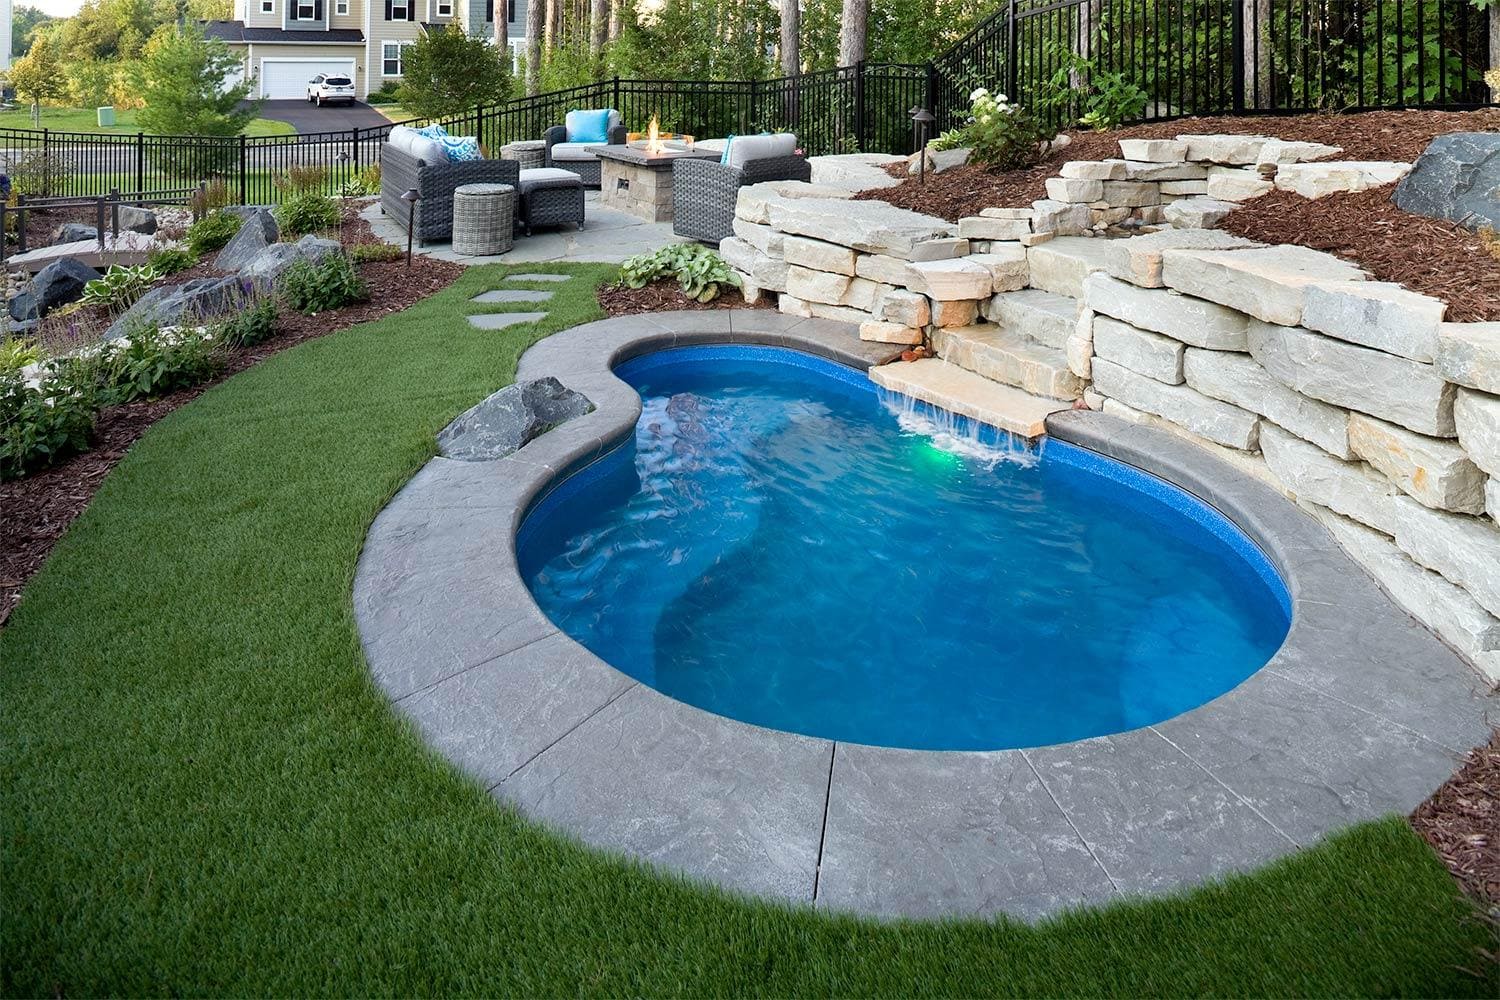 Design Ideas for Inground Pools: Create Your Dream Backyard Oasis